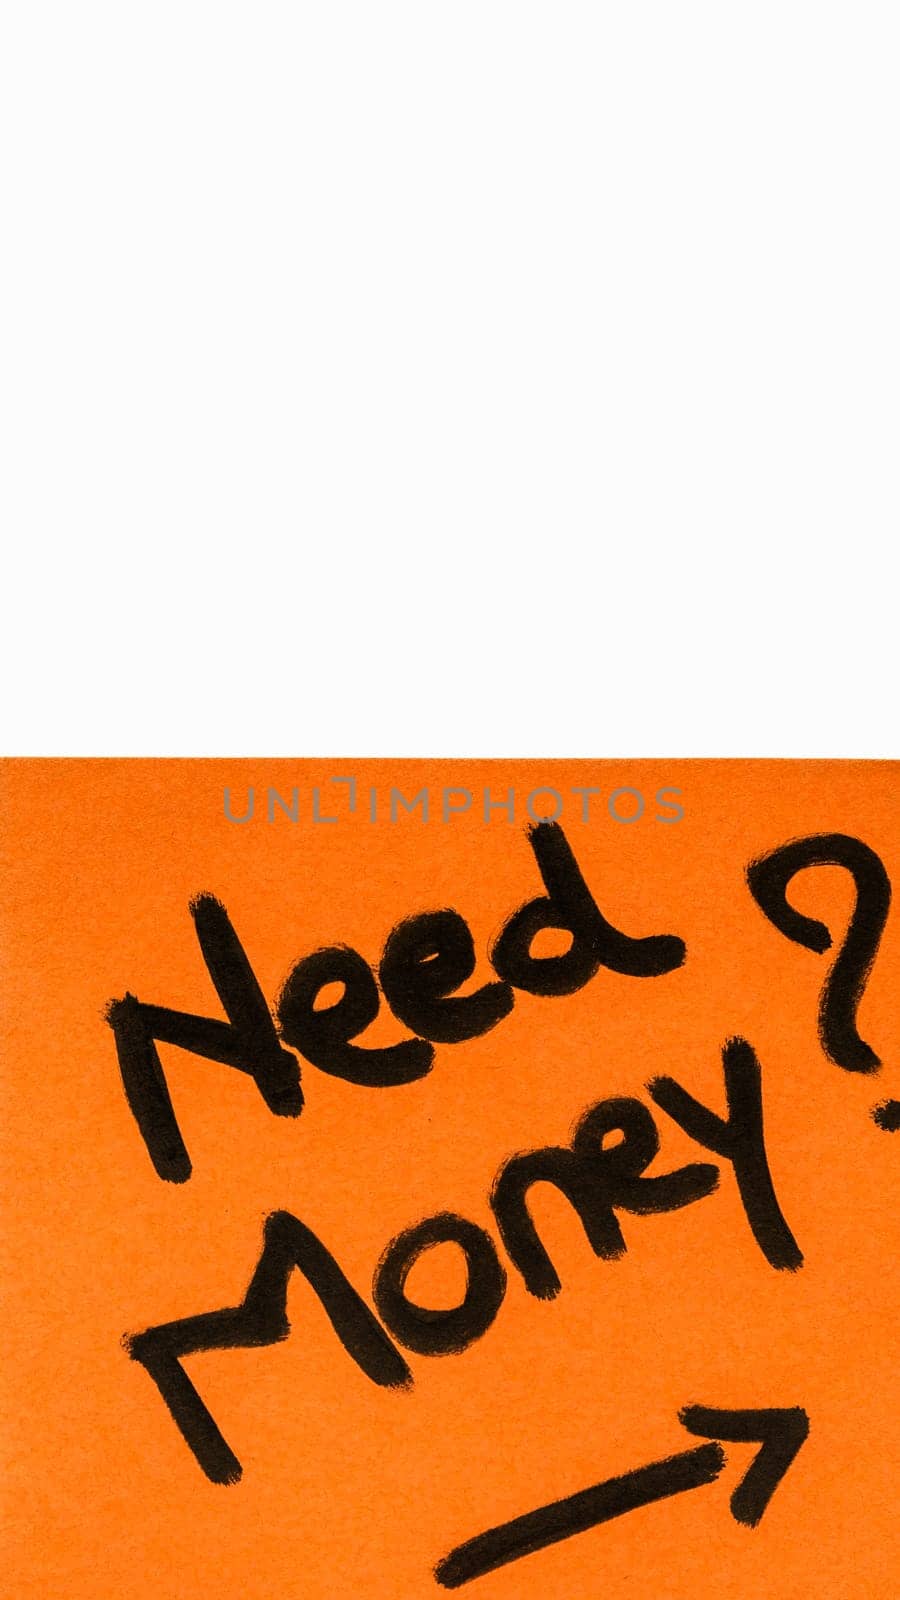 Need money handwriting text close up isolated on orange paper with copy space. by vladispas